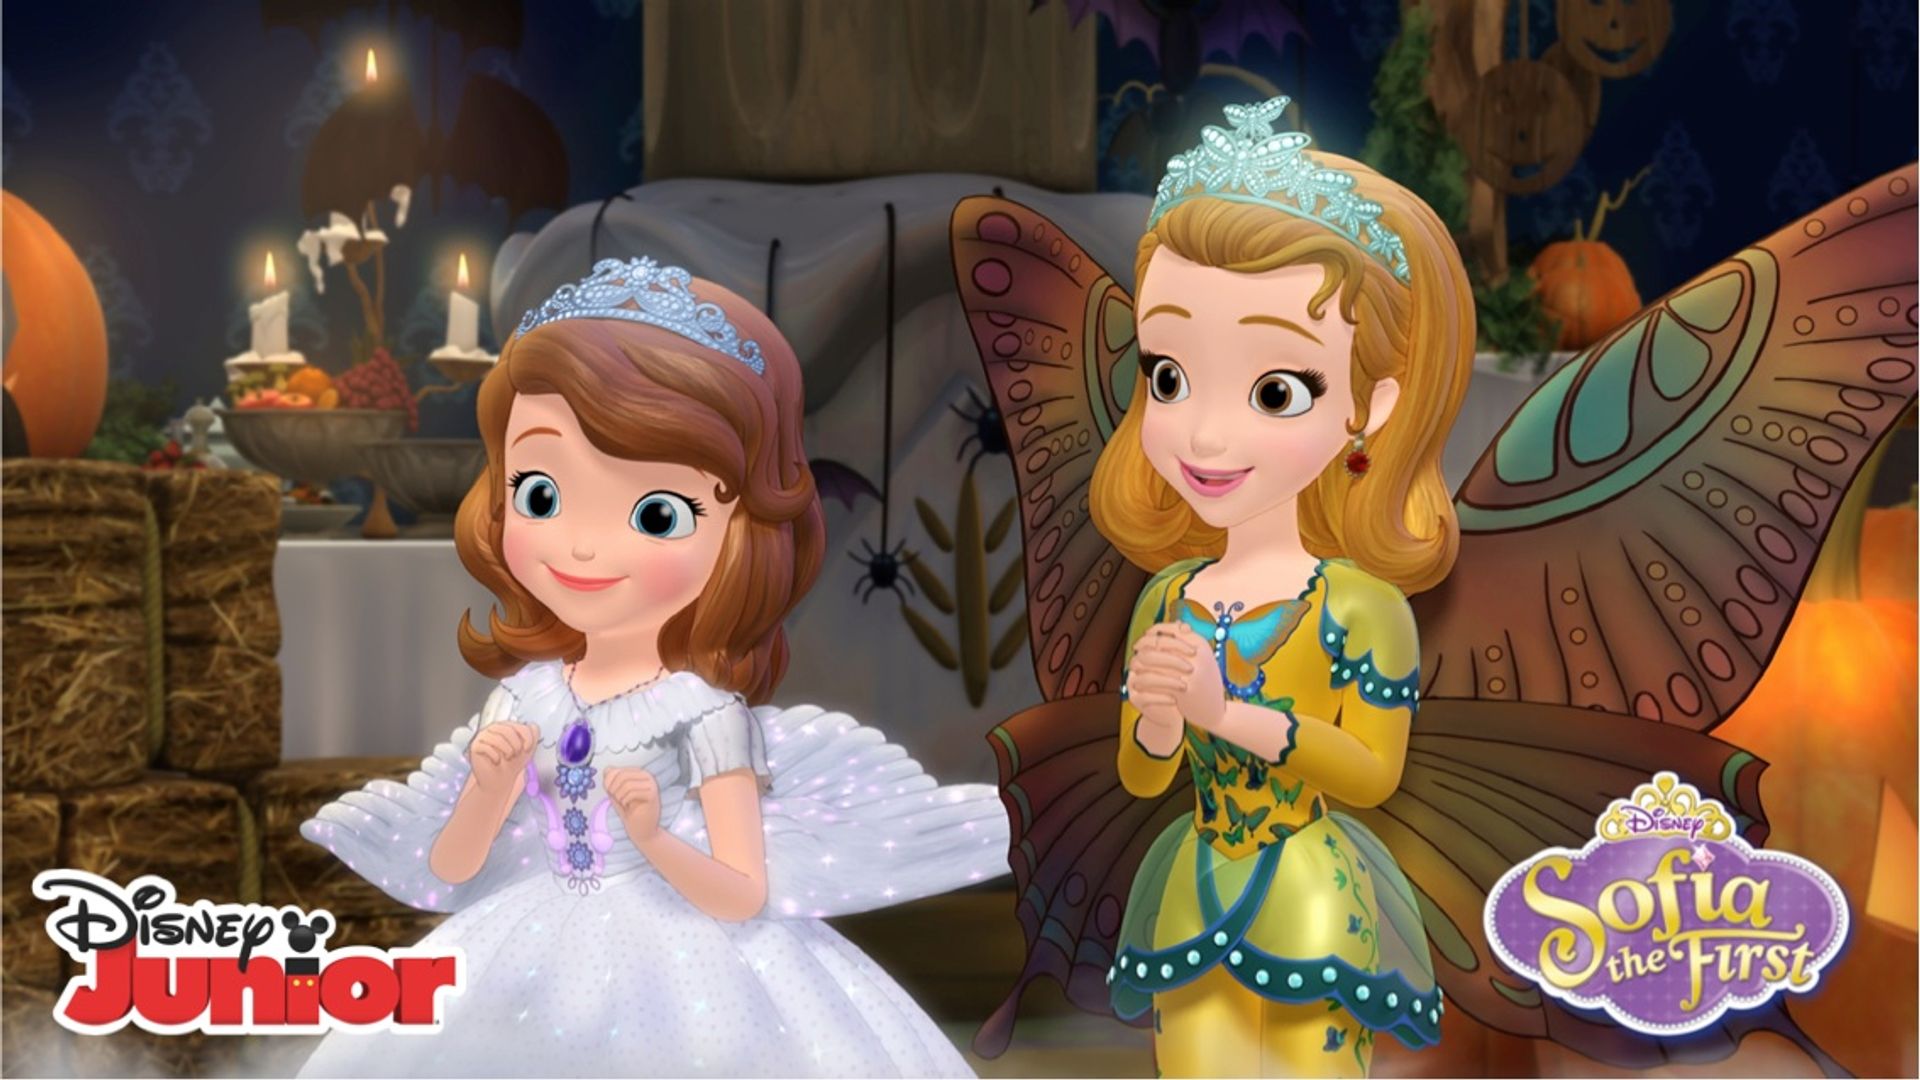 Sofia the First background